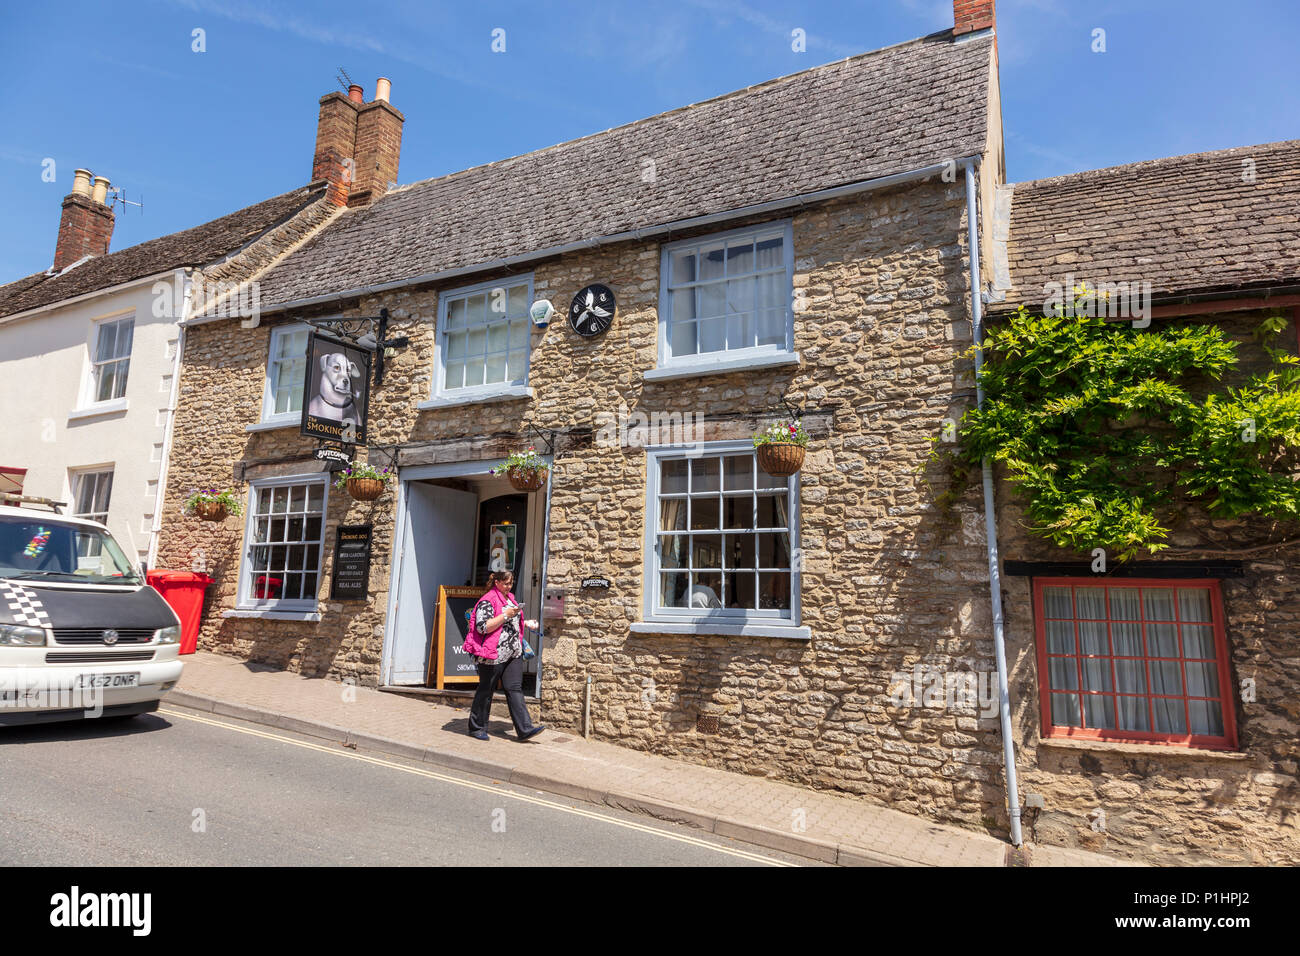 The Smoking Dog on the High Street In Malmesbury. Situated on a hill it is an attractive historic pub. Wiltshire, UK Stock Photo